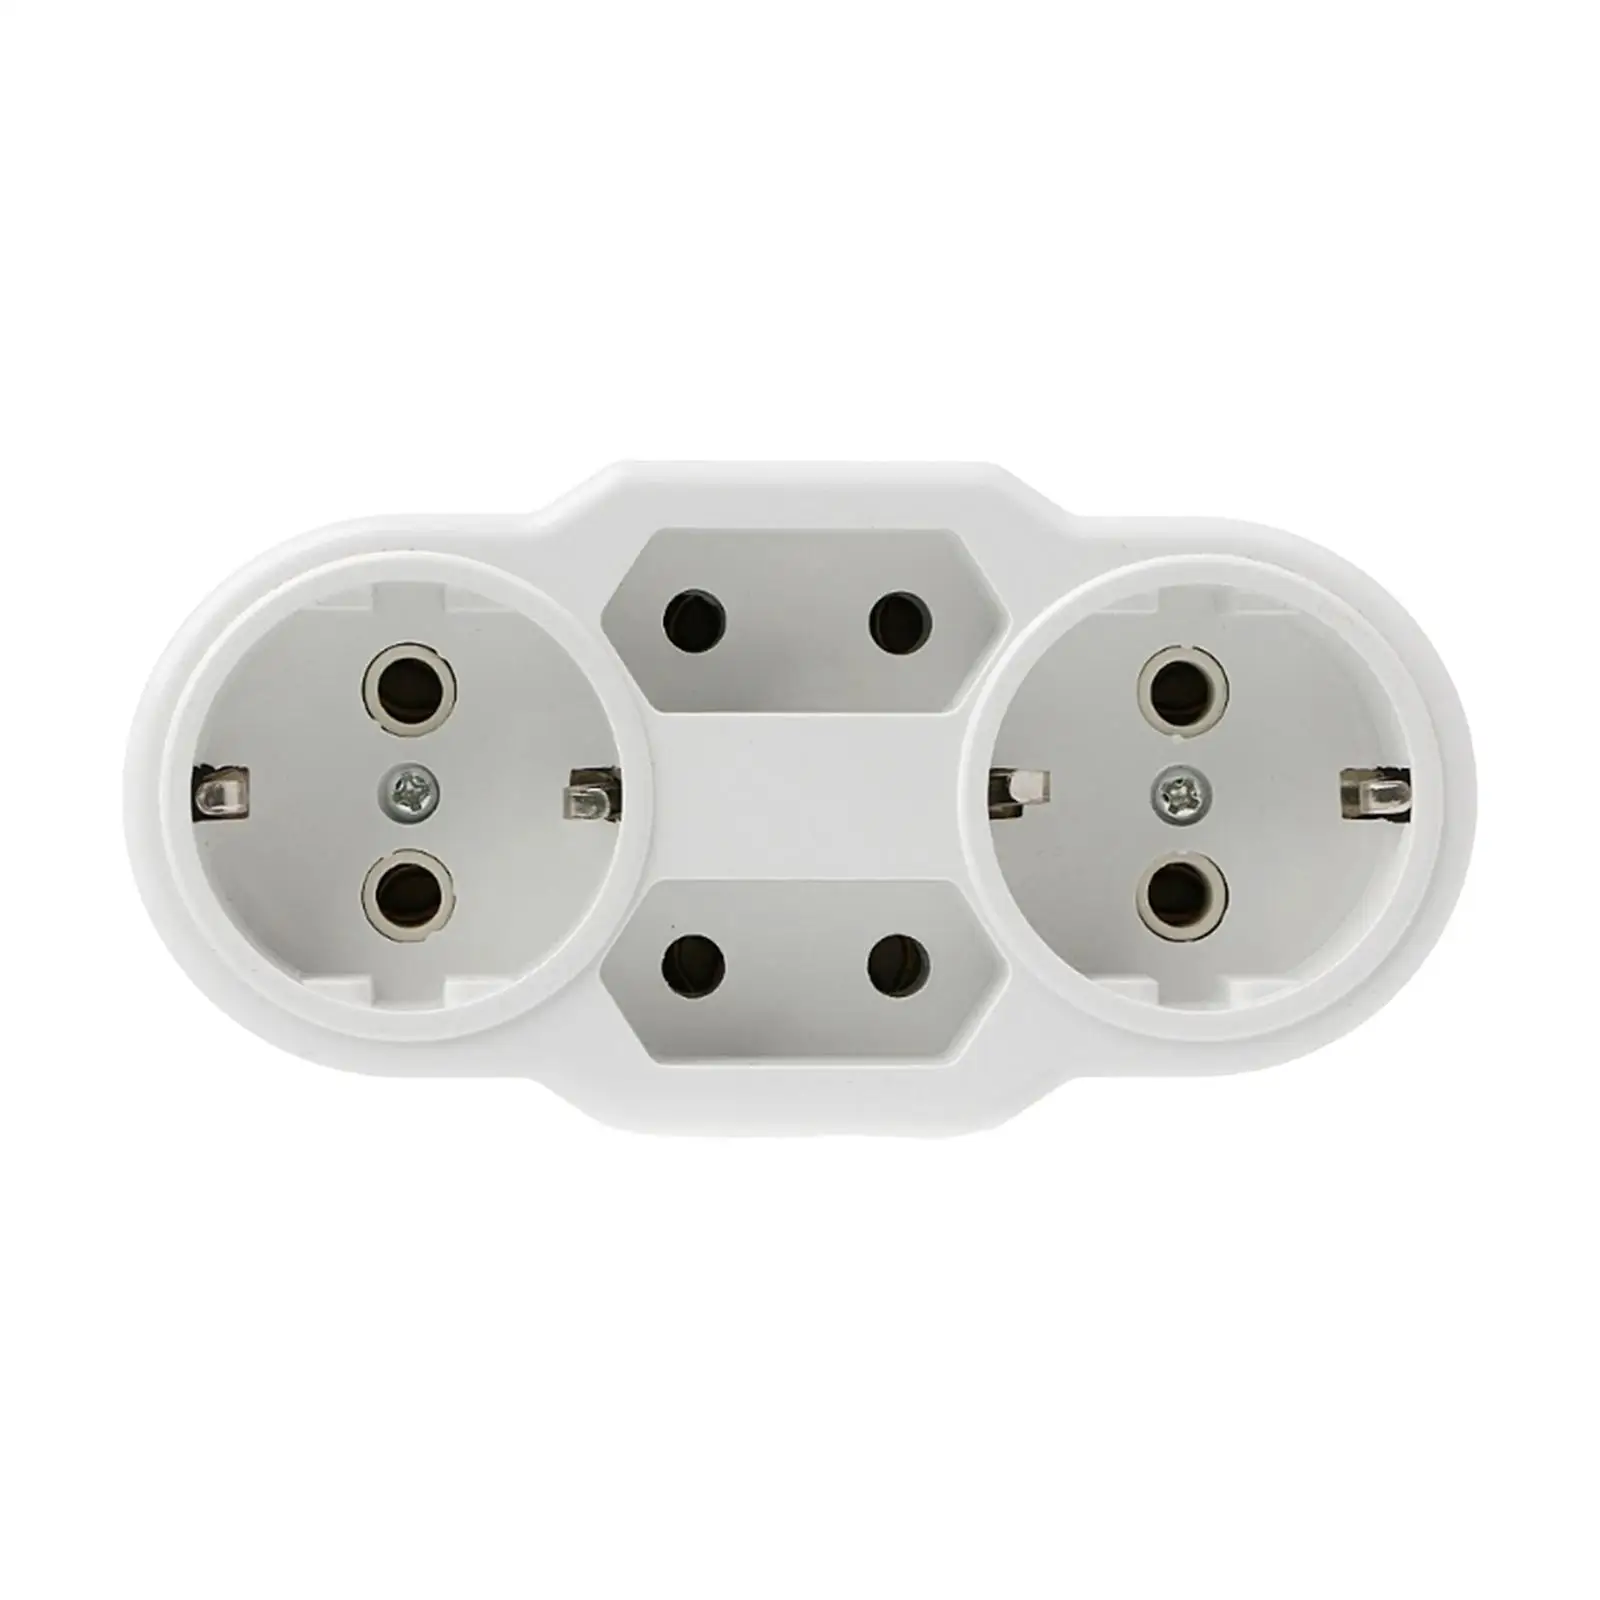 1 to 4 Way Russia Multiple Conversion Socket Plug Adapter Lightweight Converter Socket Compect Portable for travel Home